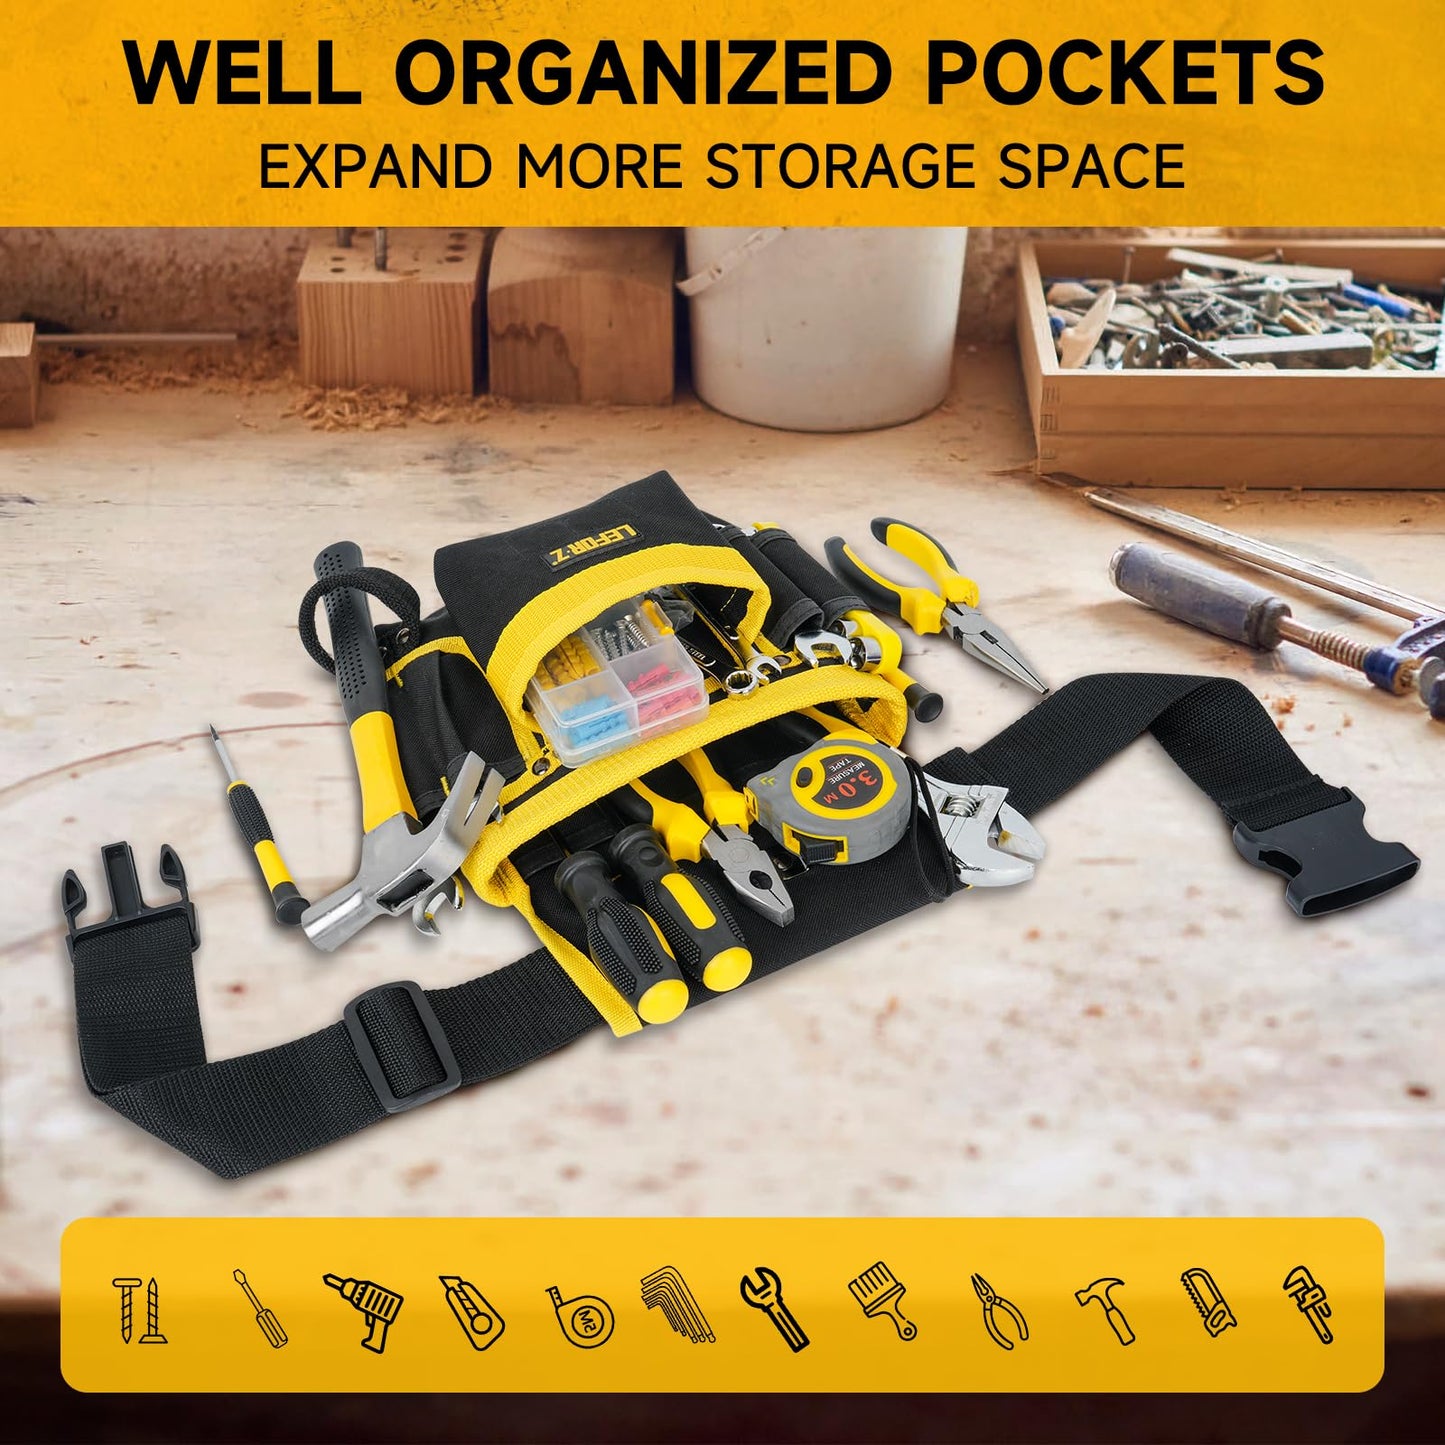 Tool Belt,Magnetic Tool Pouch,13-Pockets Tool Belts for Men,Detachable & Adjustable Tool Pouch belt for Electrician,Carpenter,Construction,Work